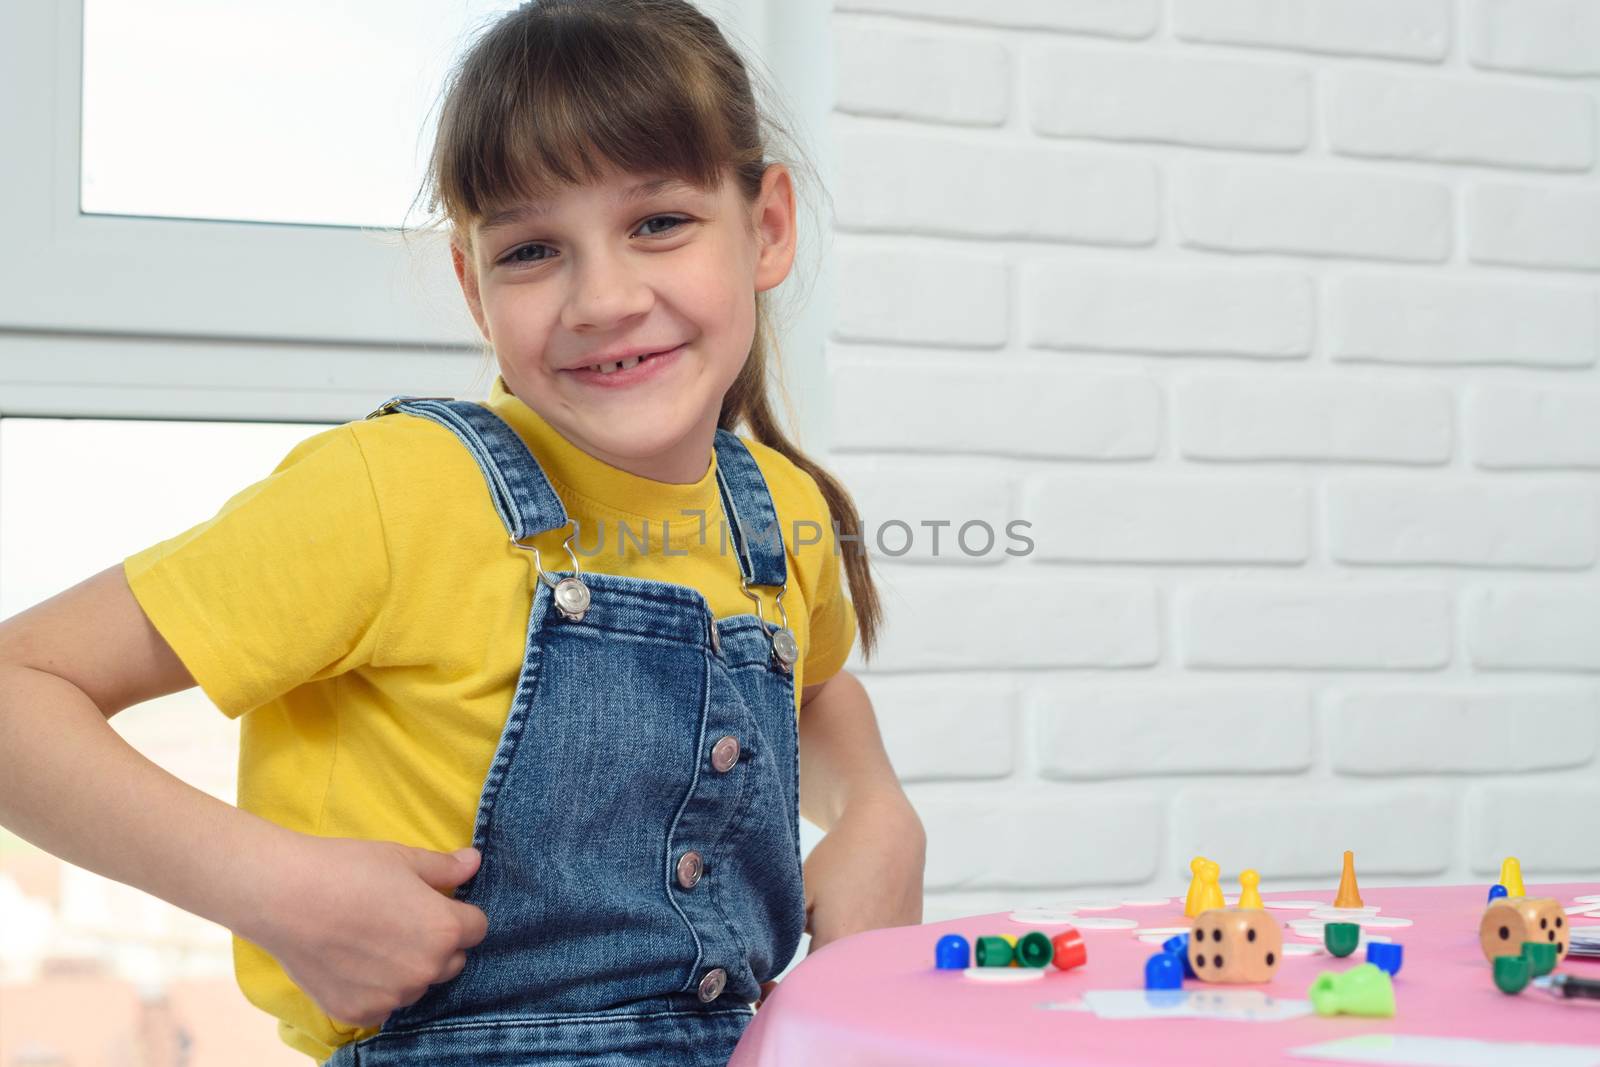 A contented nine-year-old girl looked into the frame, sitting at the table and playing a board game